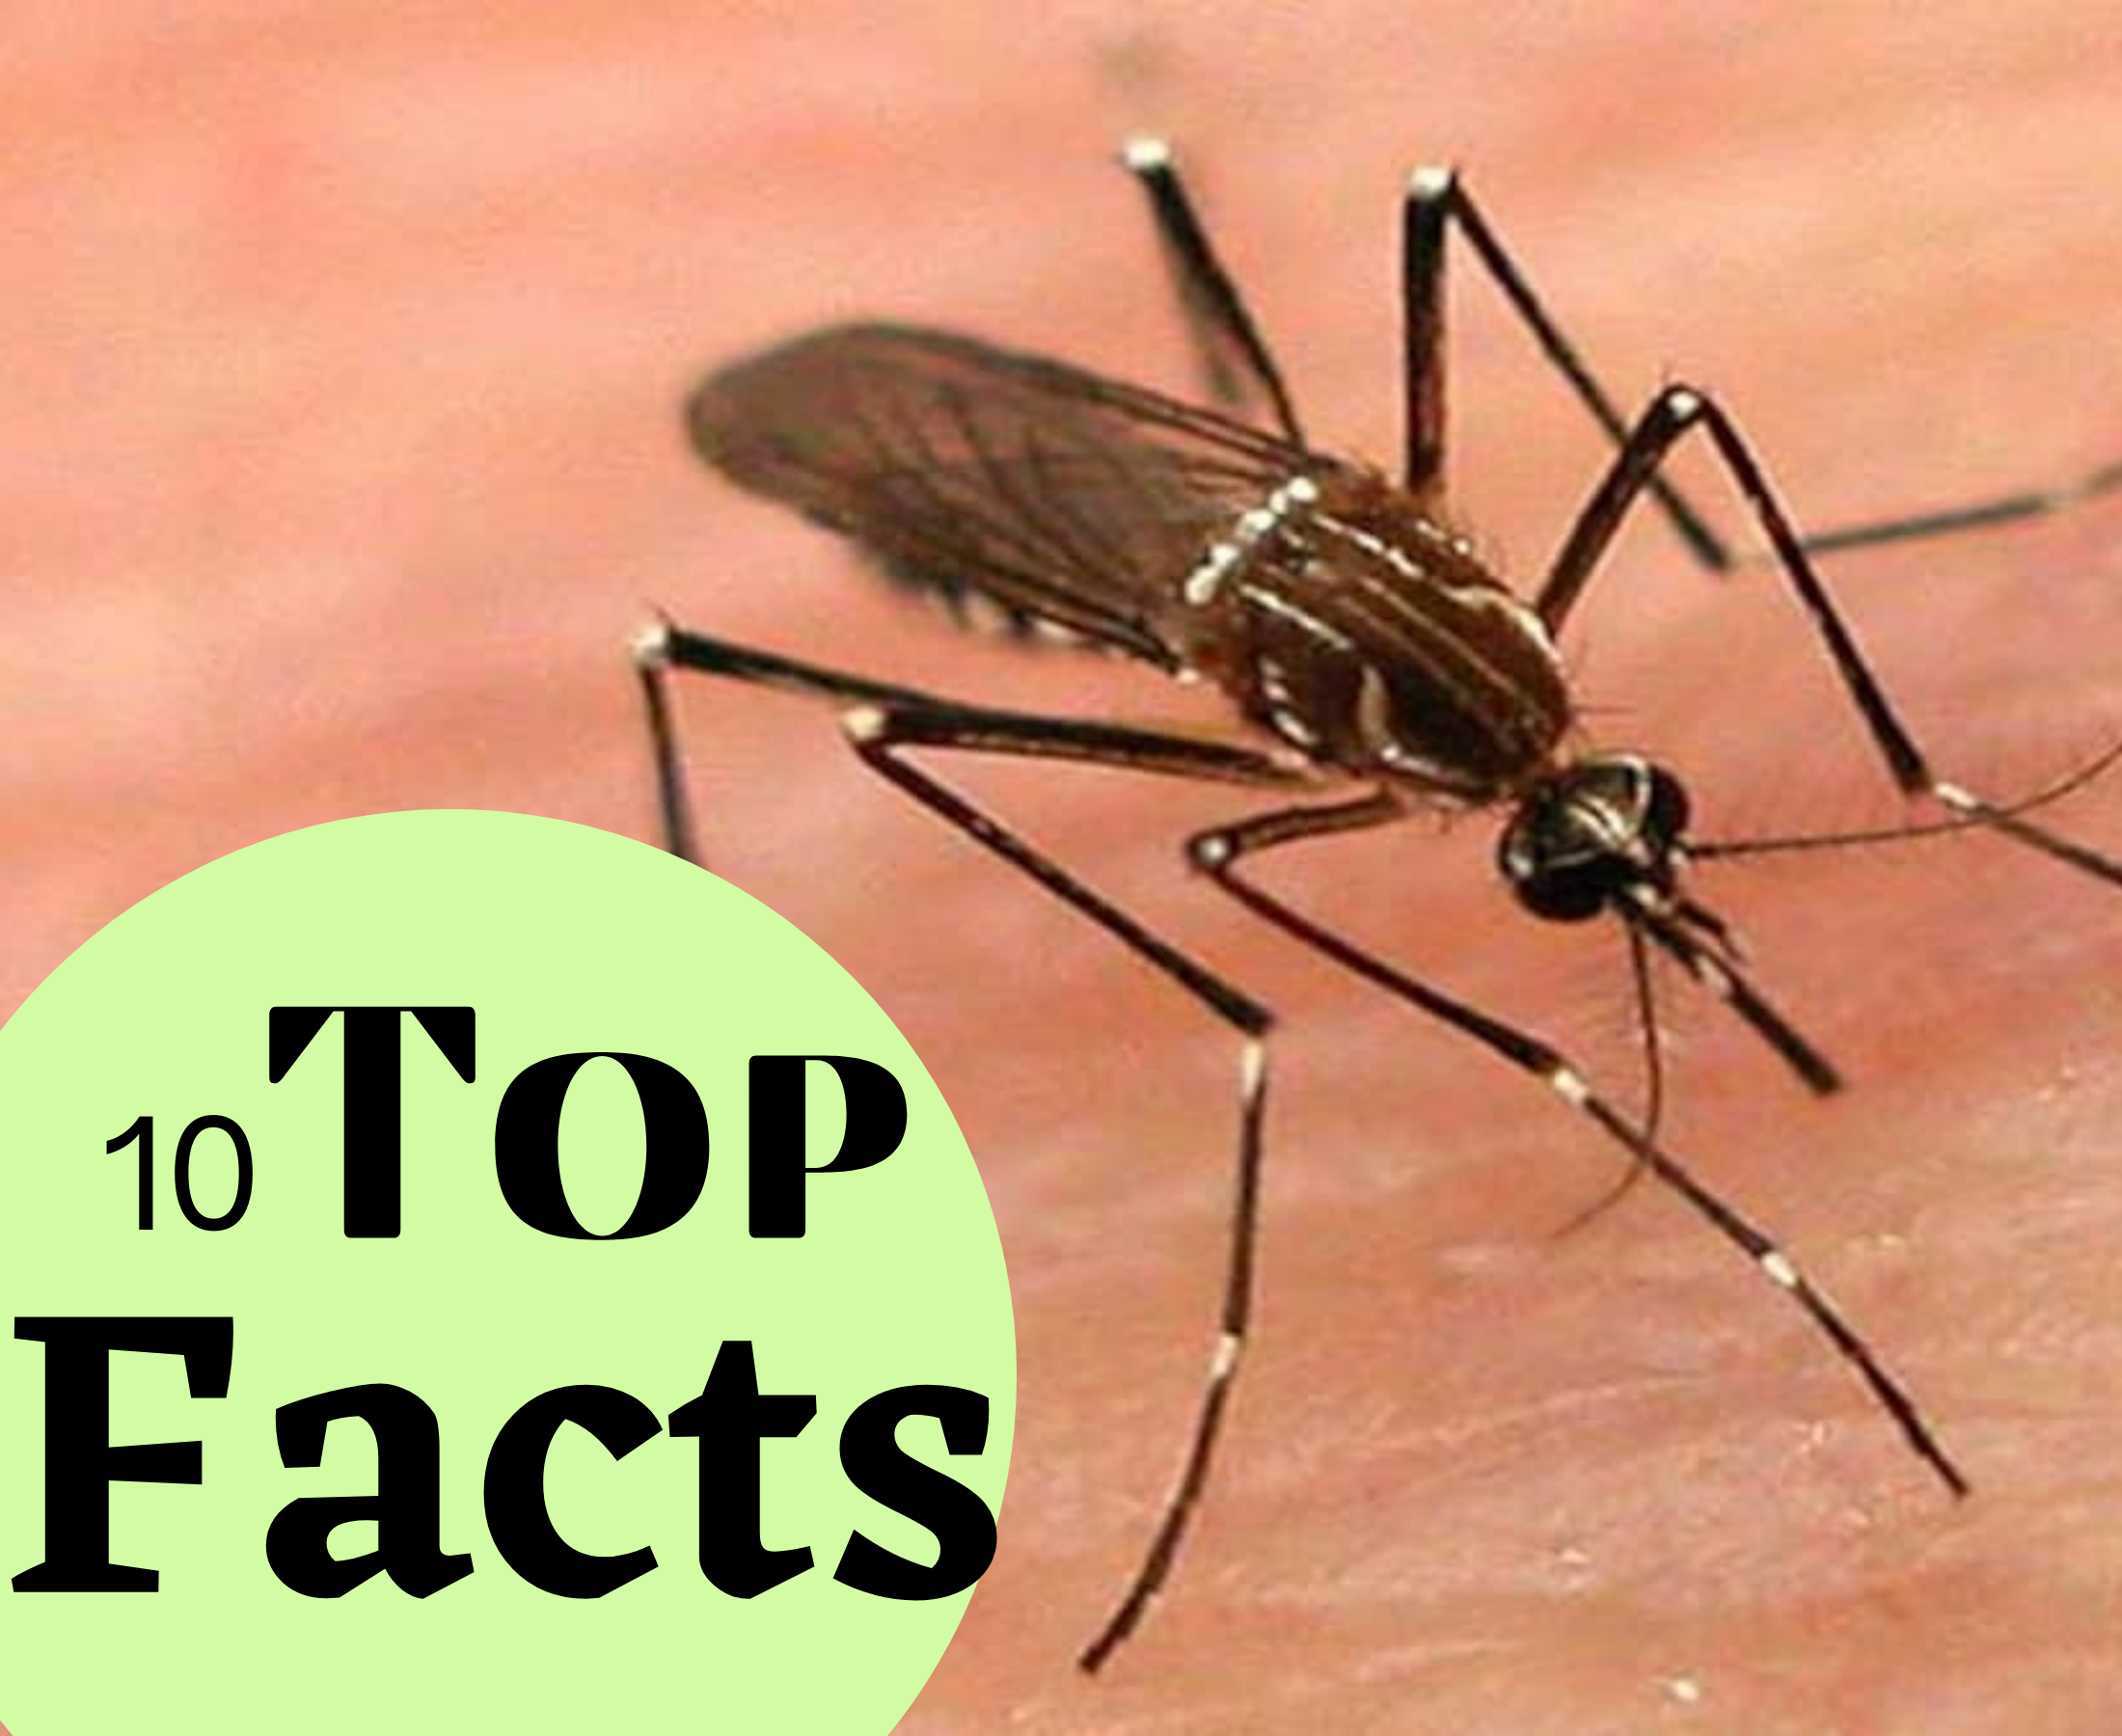 10 interesting facts about the mosquito that can shock you!